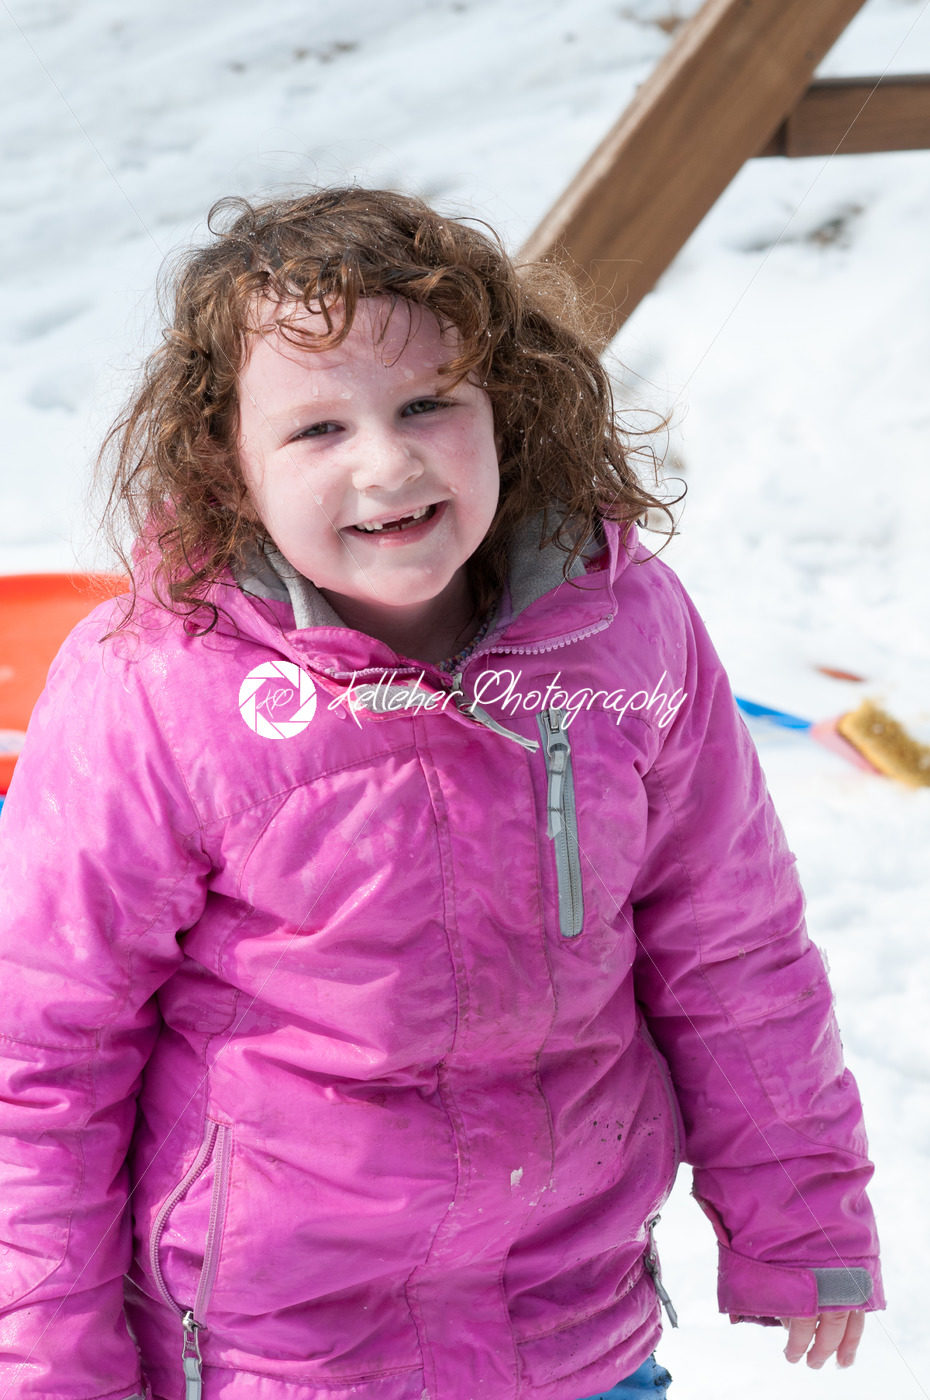 Happy toddler girl in warm coat on on snow day and having a fun in the winter outside, outdoor portrait - Kelleher Photography Store